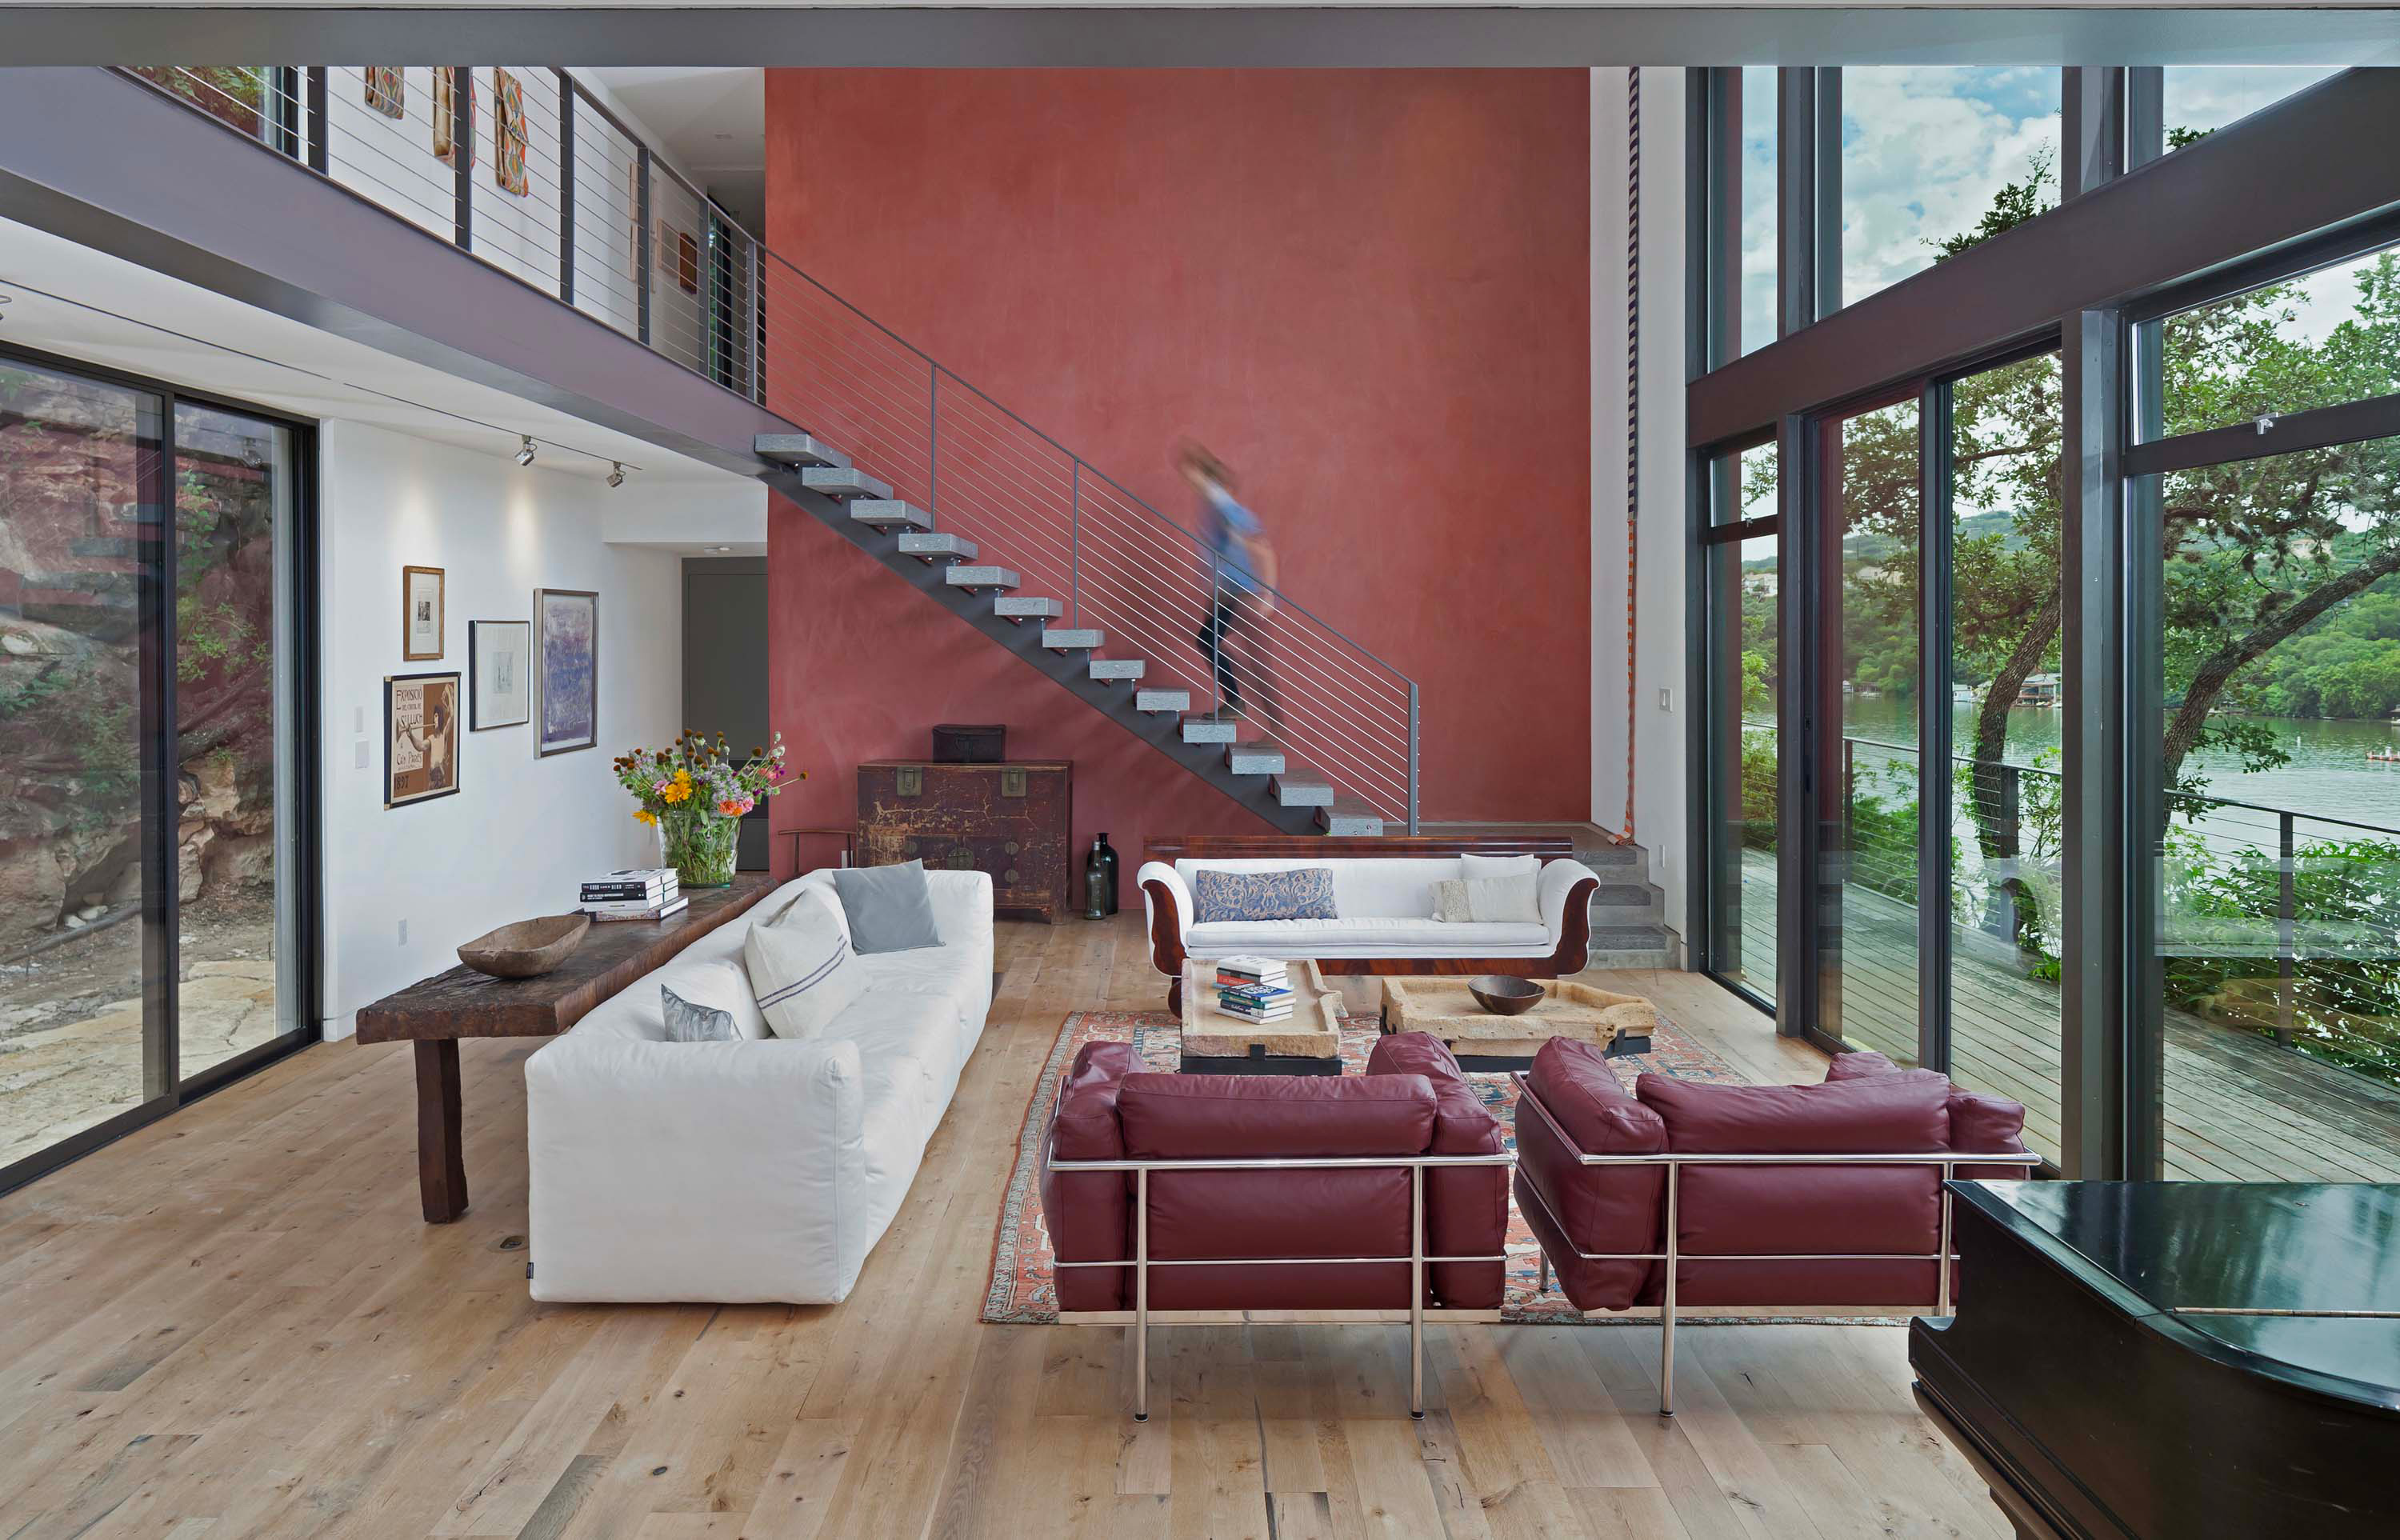 Exterior photo of the Cliffside Residence by Specht Novak Architects. Shot Andrea Calo, featuring a living area, with steel, wooden, and concrete details, a glass wall that brightens the room, and a red accent wall.